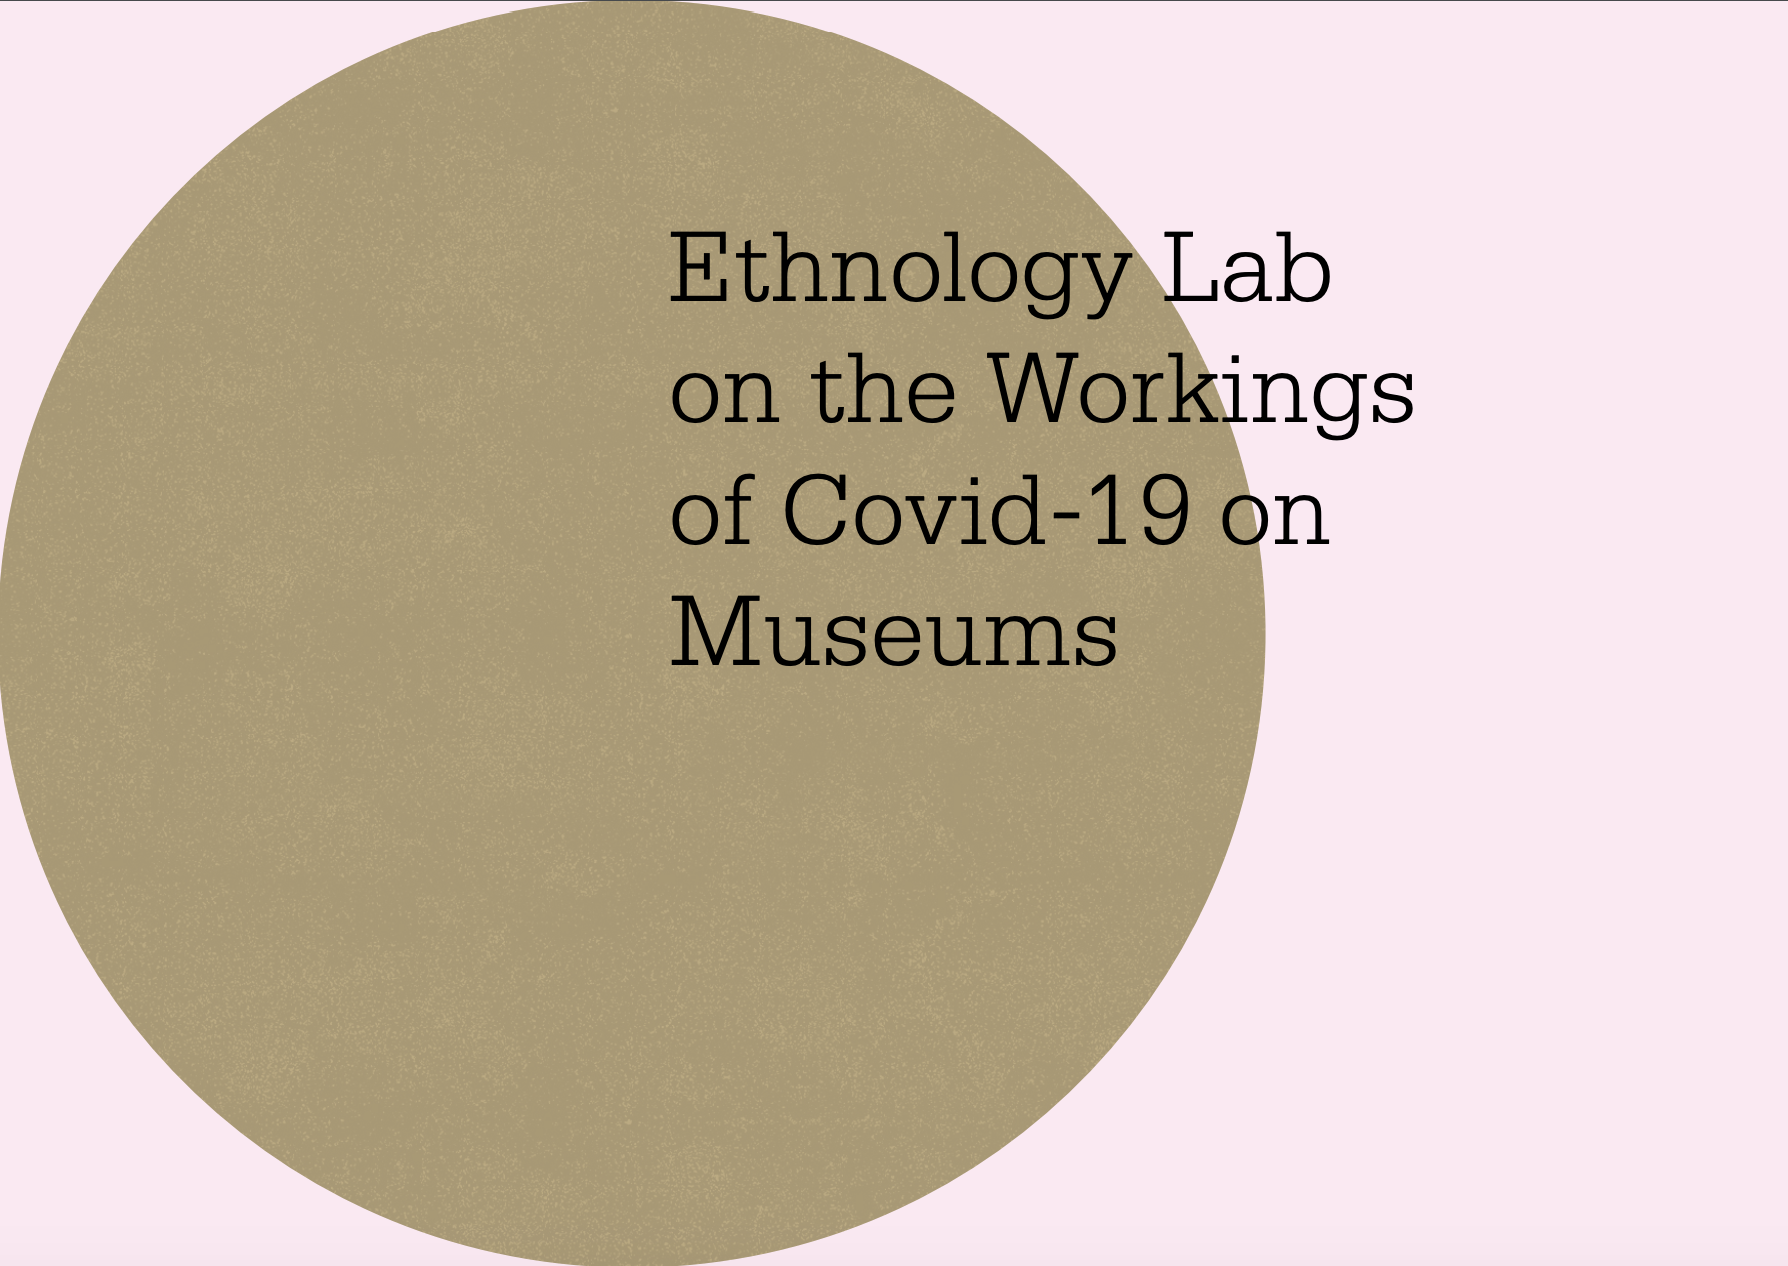 Ethnology Lab on the Workings of Covid-19 on Museums